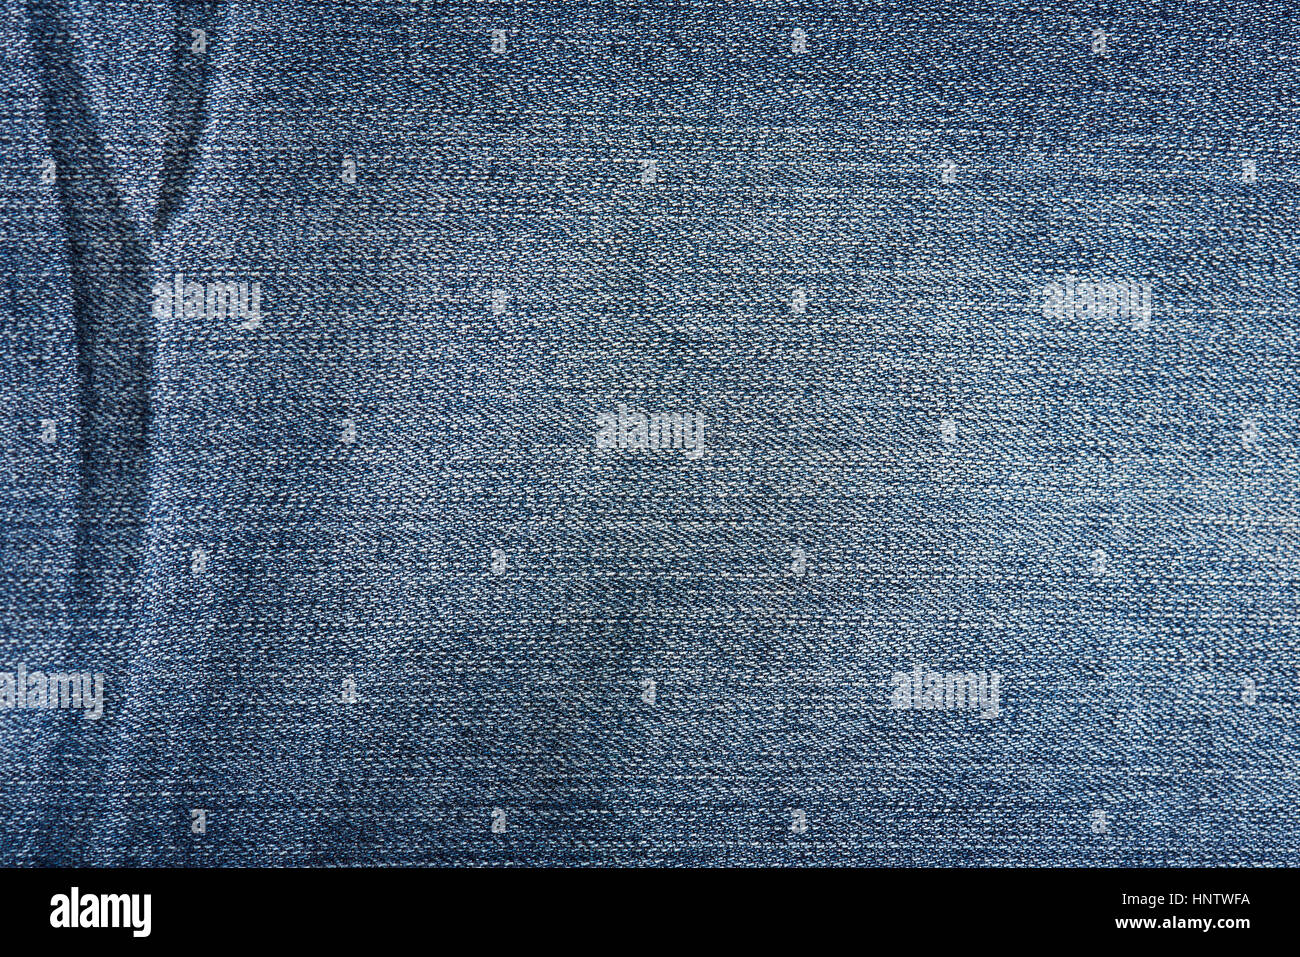 Jeans texture close up with white retro spot line Stock Photo